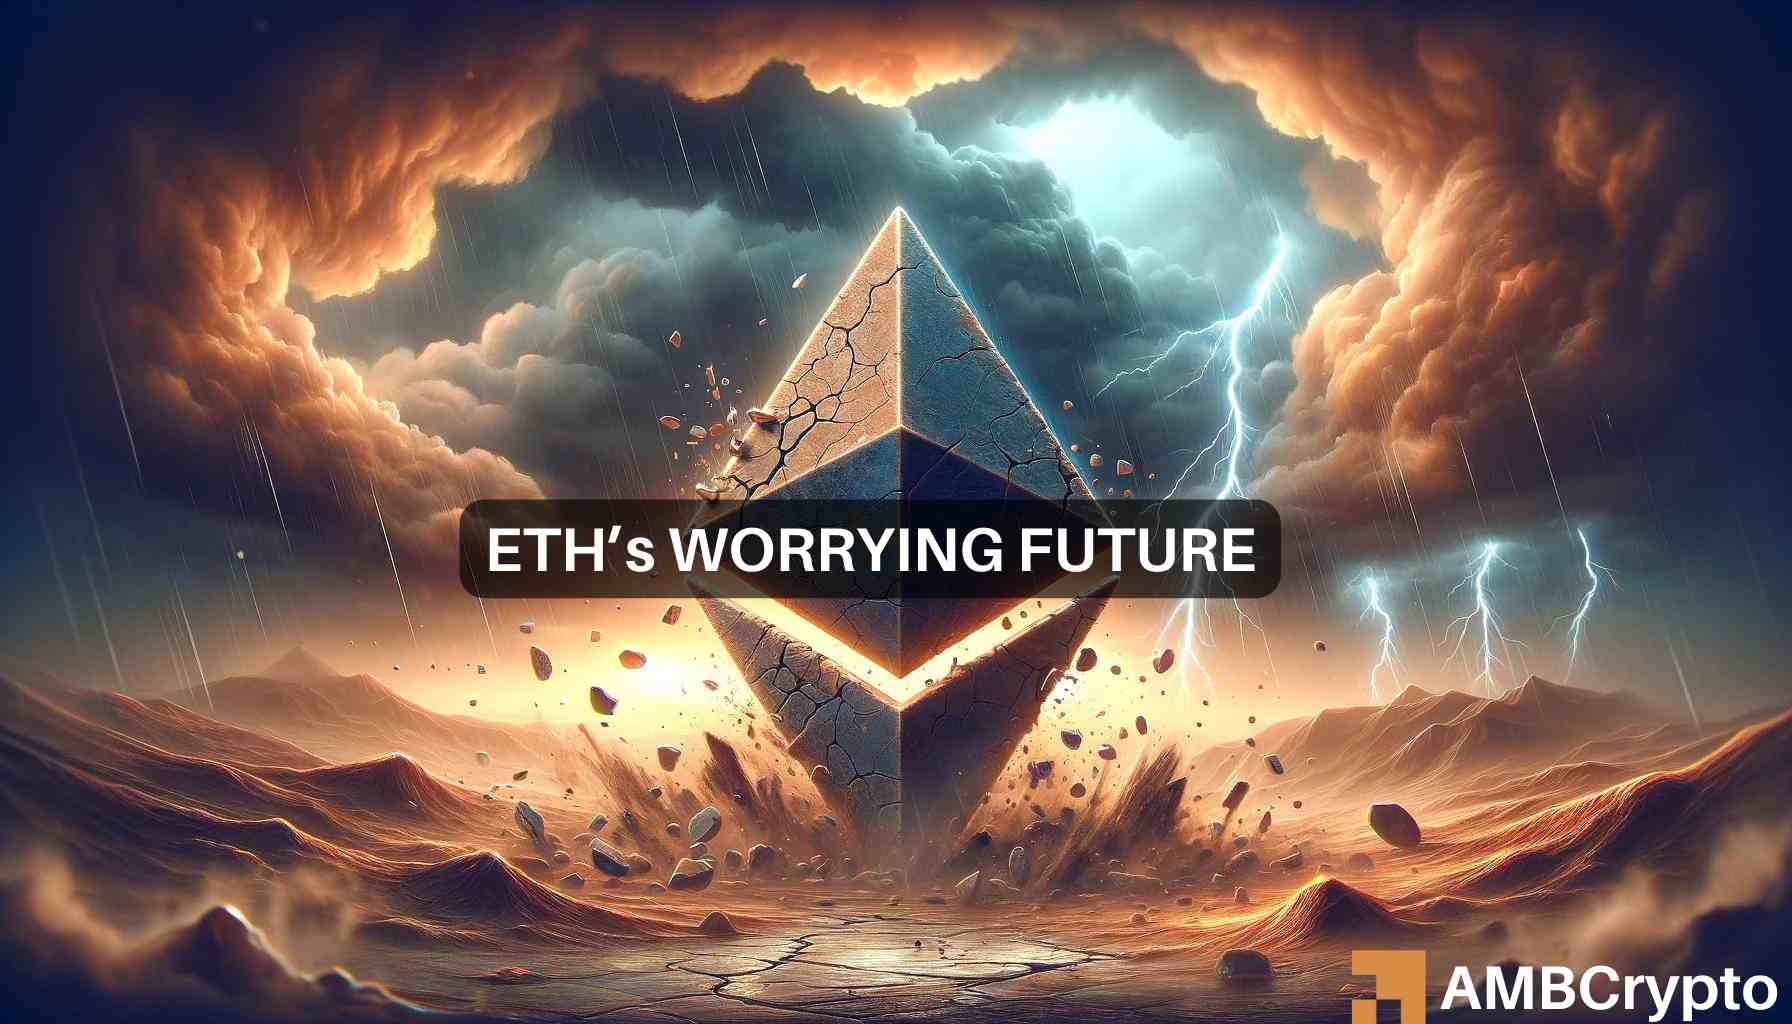 Ethereum traders start to bet big against ETH - Here's why